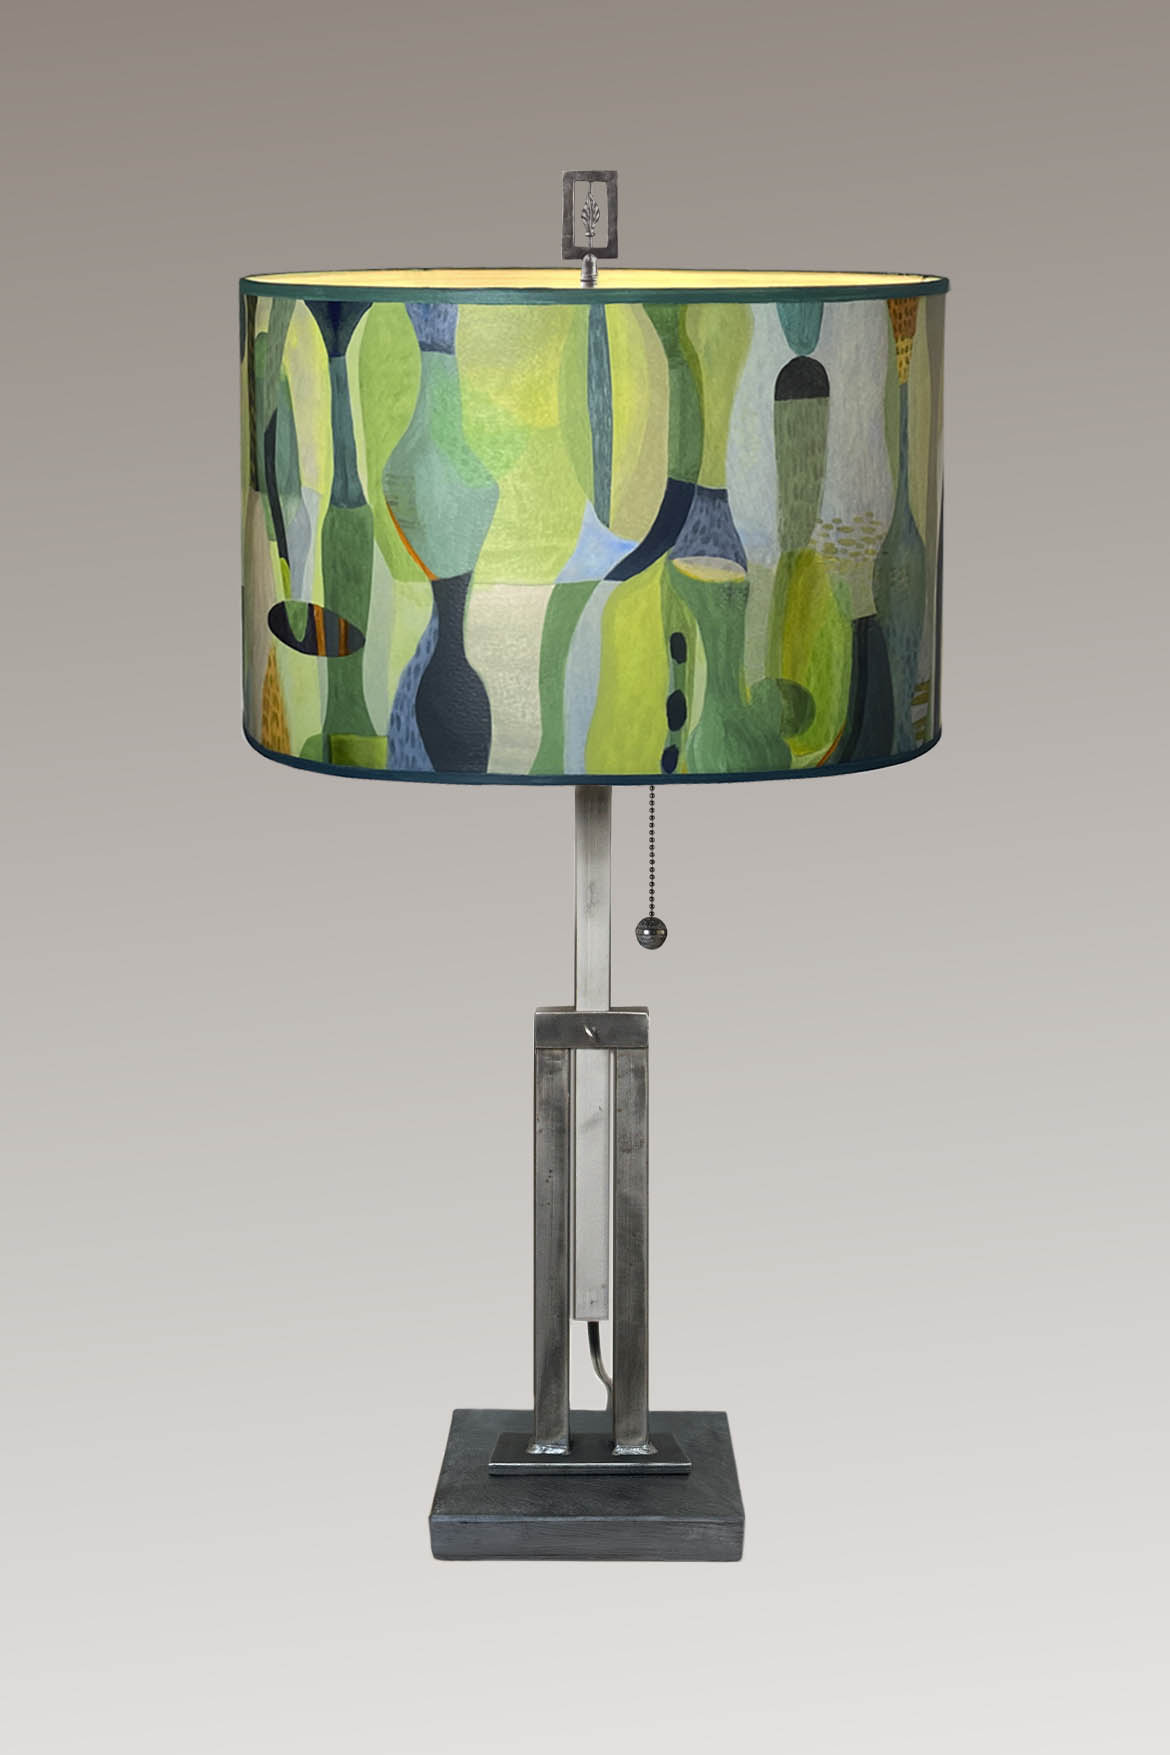 Janna Ugone & Co Table Lamp Adjustable-Height Steel Table Lamp with Large Drum Shade in Riviera in Citrus